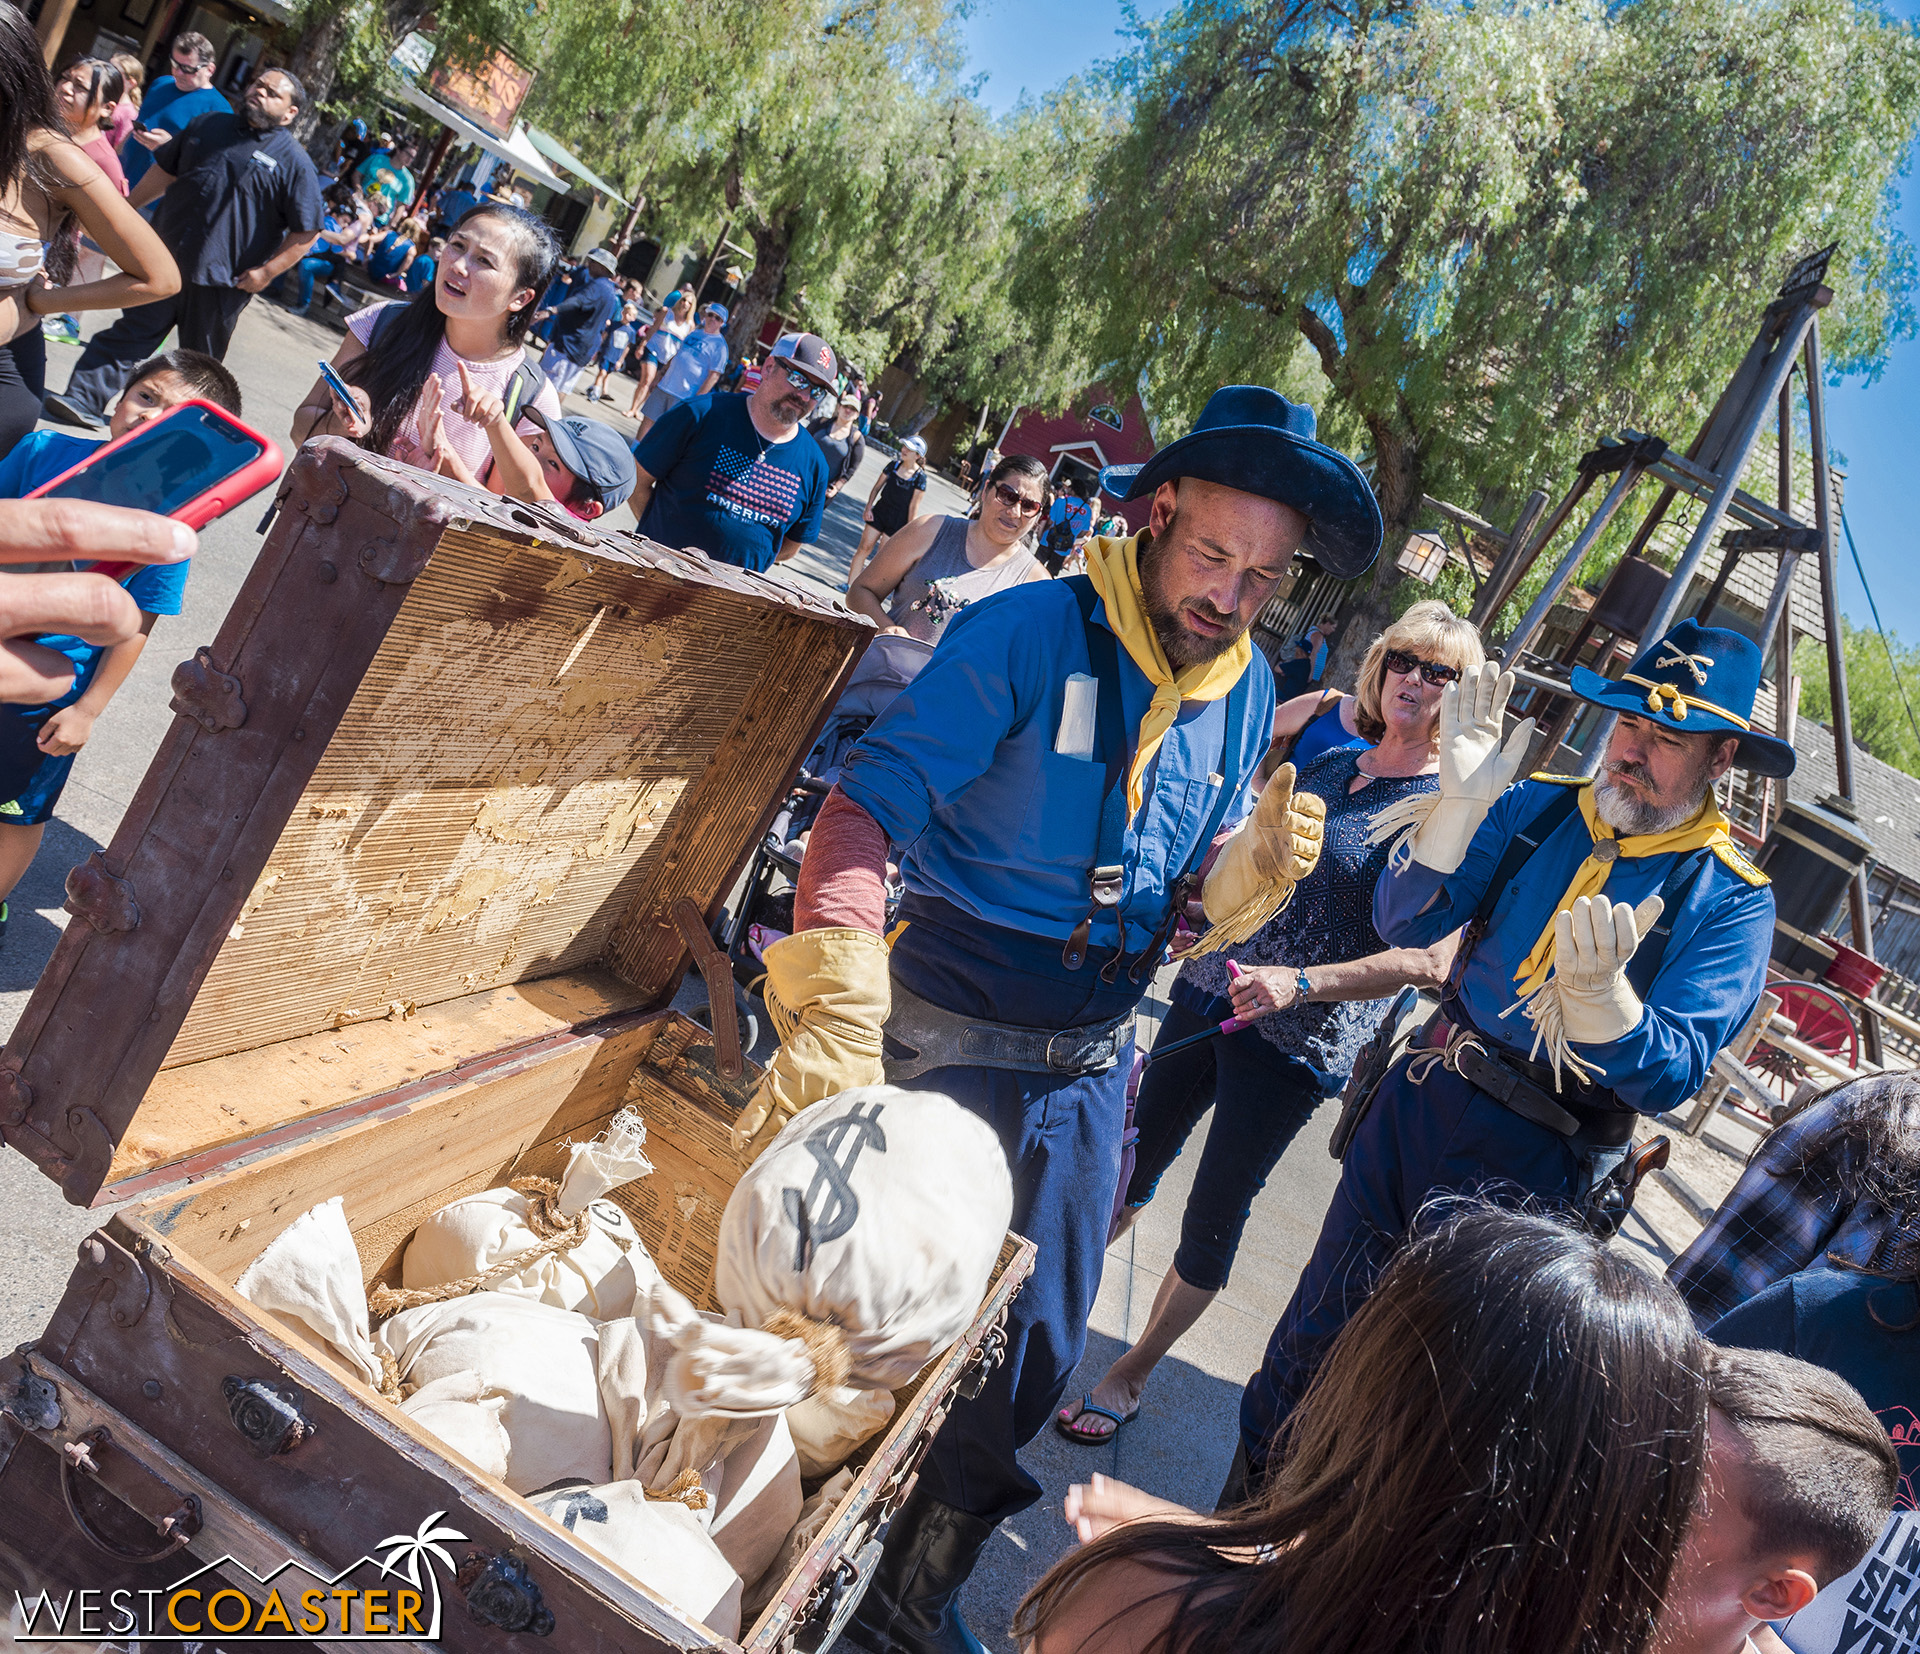  Hudson and Brady propose that the only way to protect Calico is to have everyone in town place their valuables in this U.S. Cavalry chest, which would then be guarded 24 hours a day by the Cavalry members. 